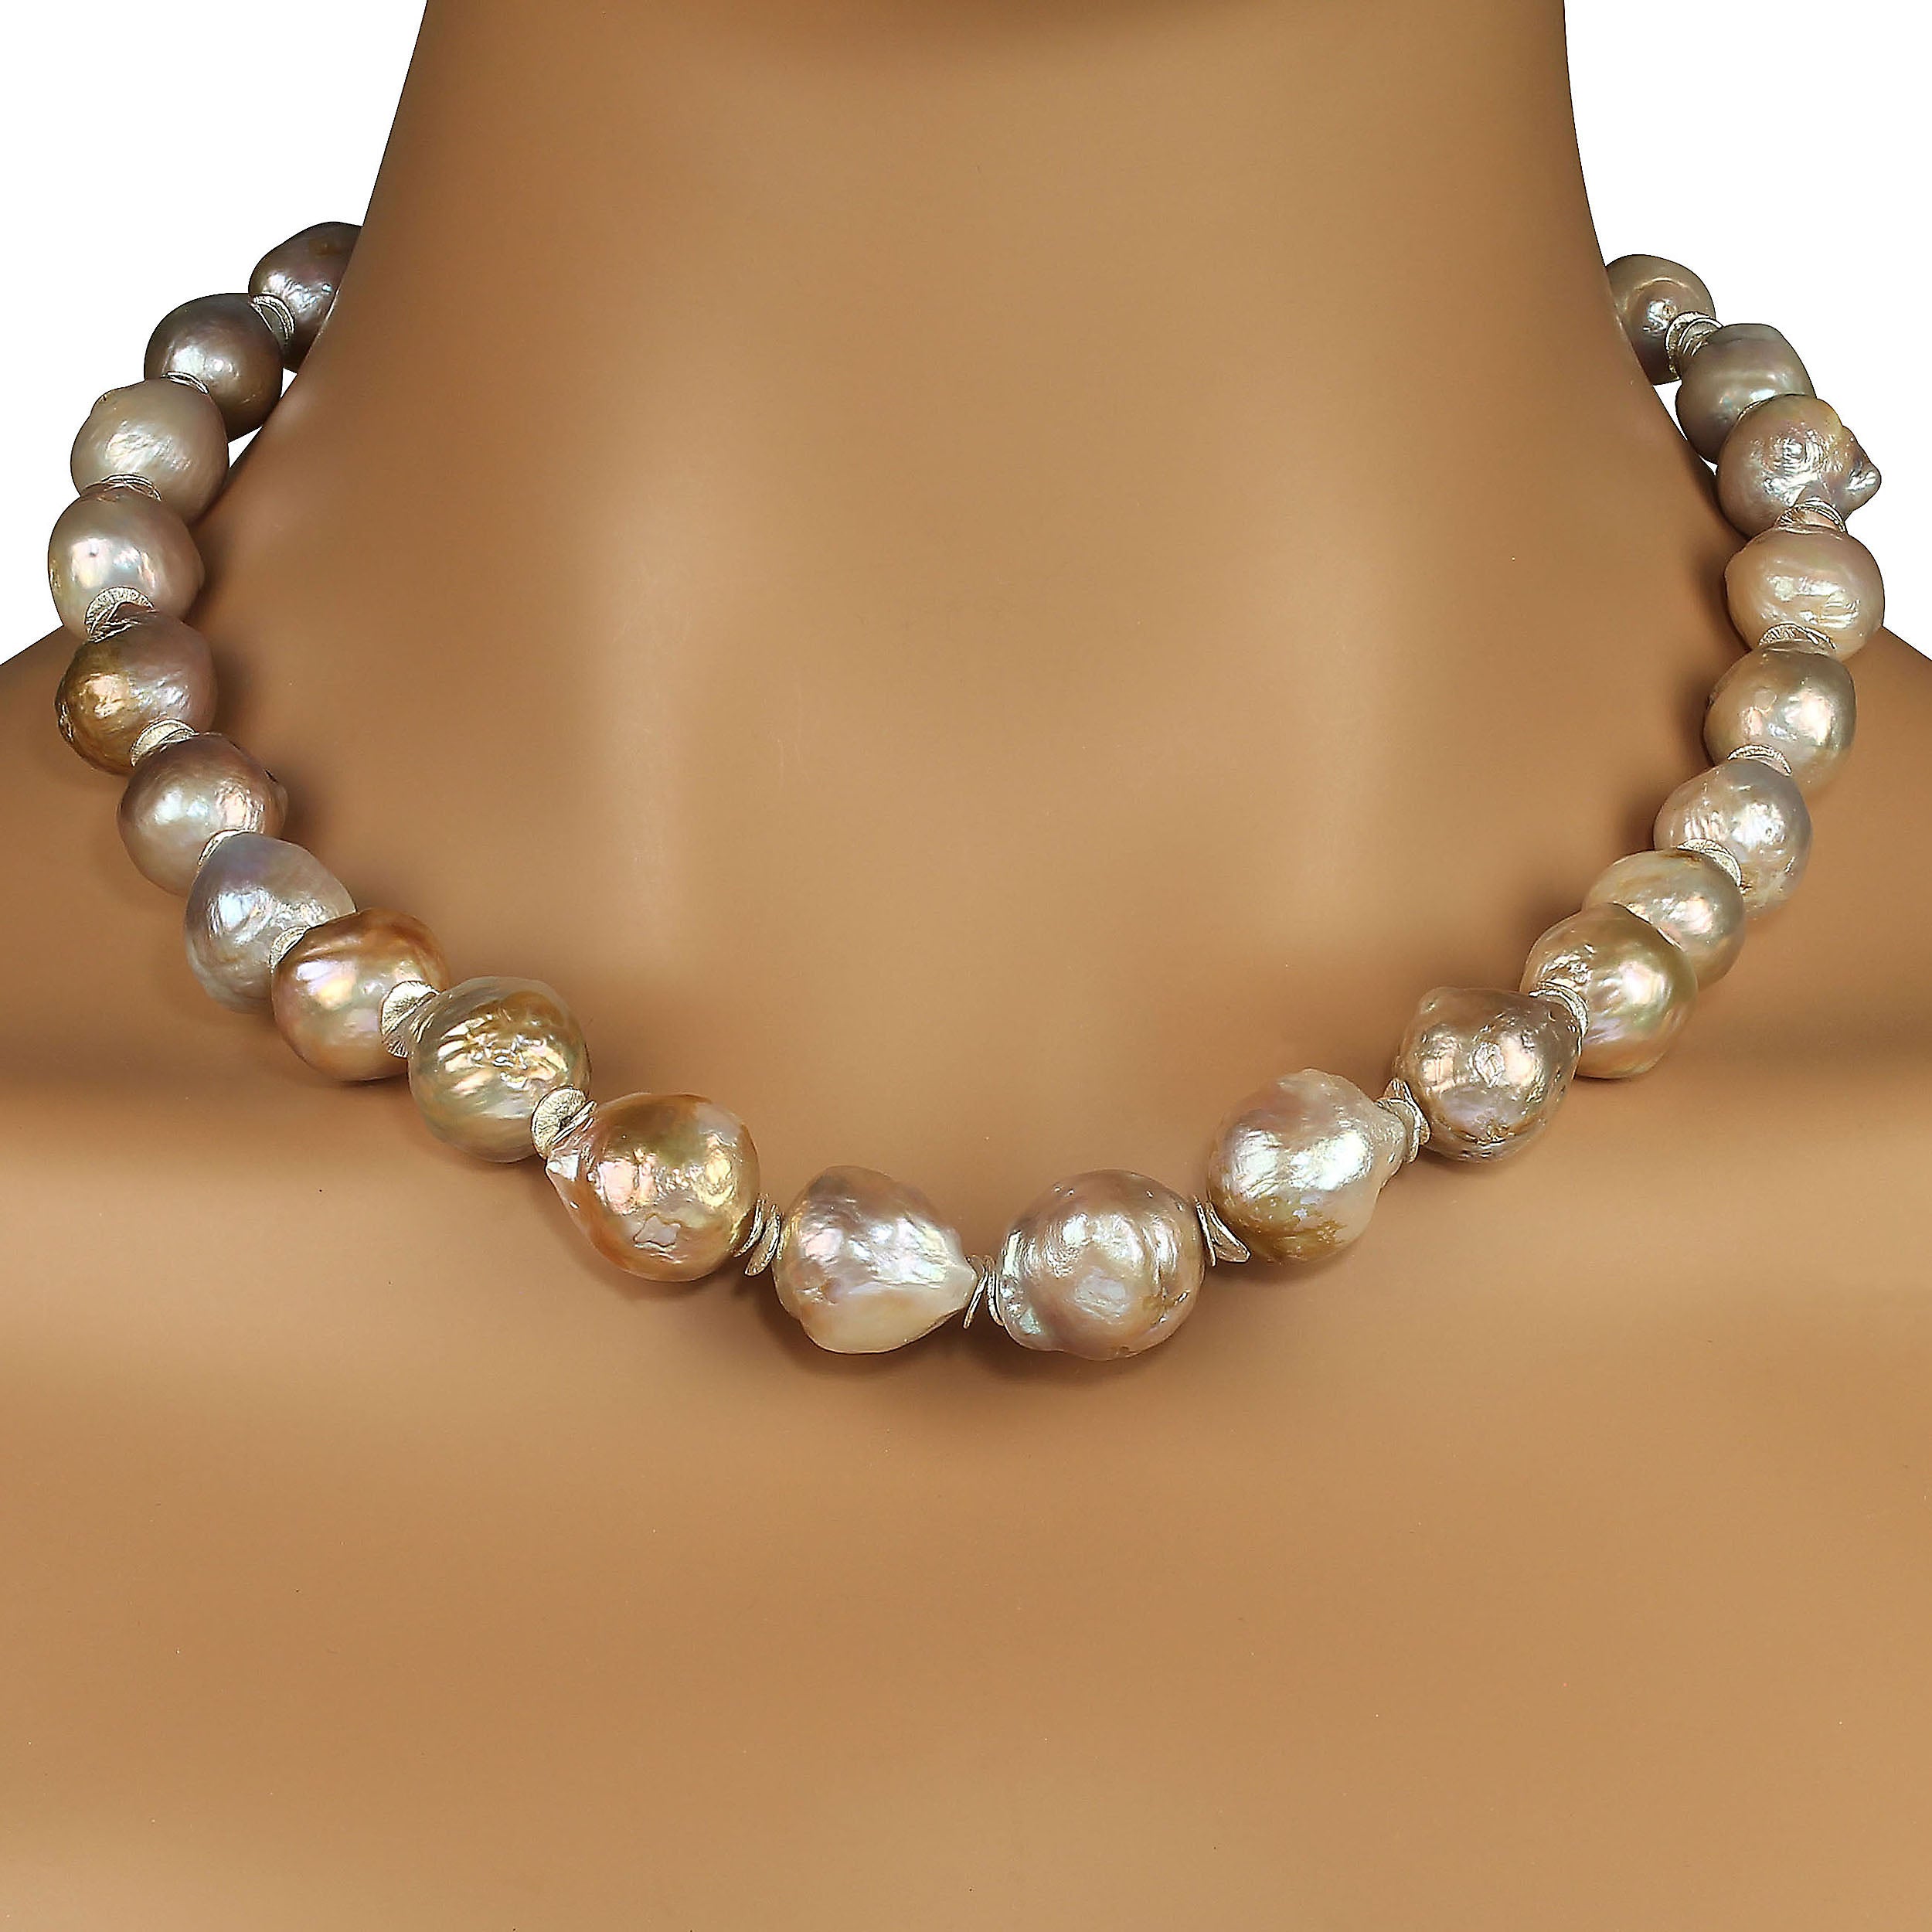 AJD 19 Inch Baroque Iridescent Silvery Pearls with silvery accents Perfect Gift!